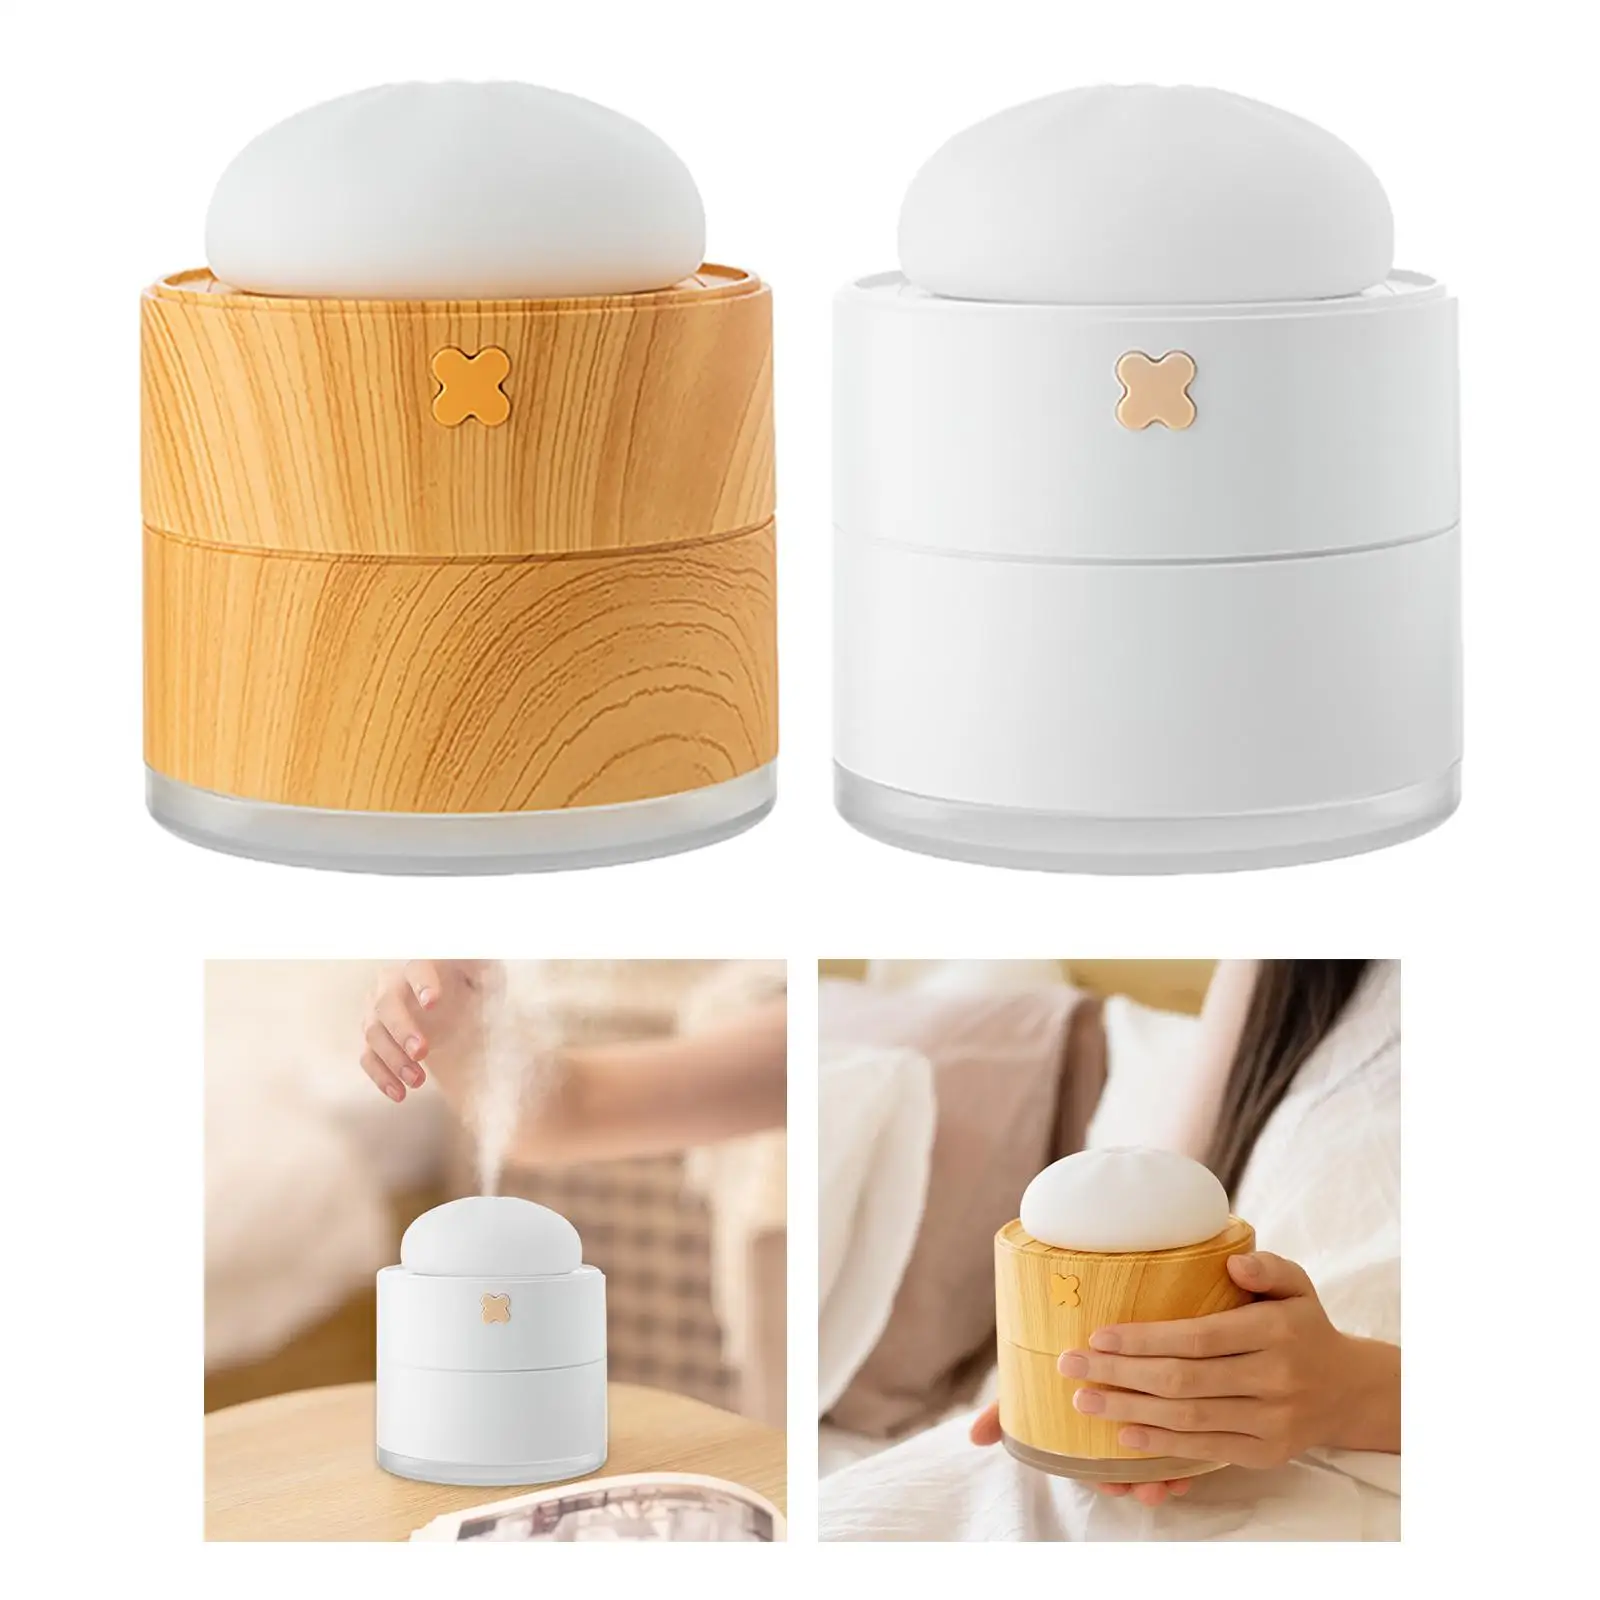 400ml Air Humidifier Quiet Operation Diffuser for Bedroom Office